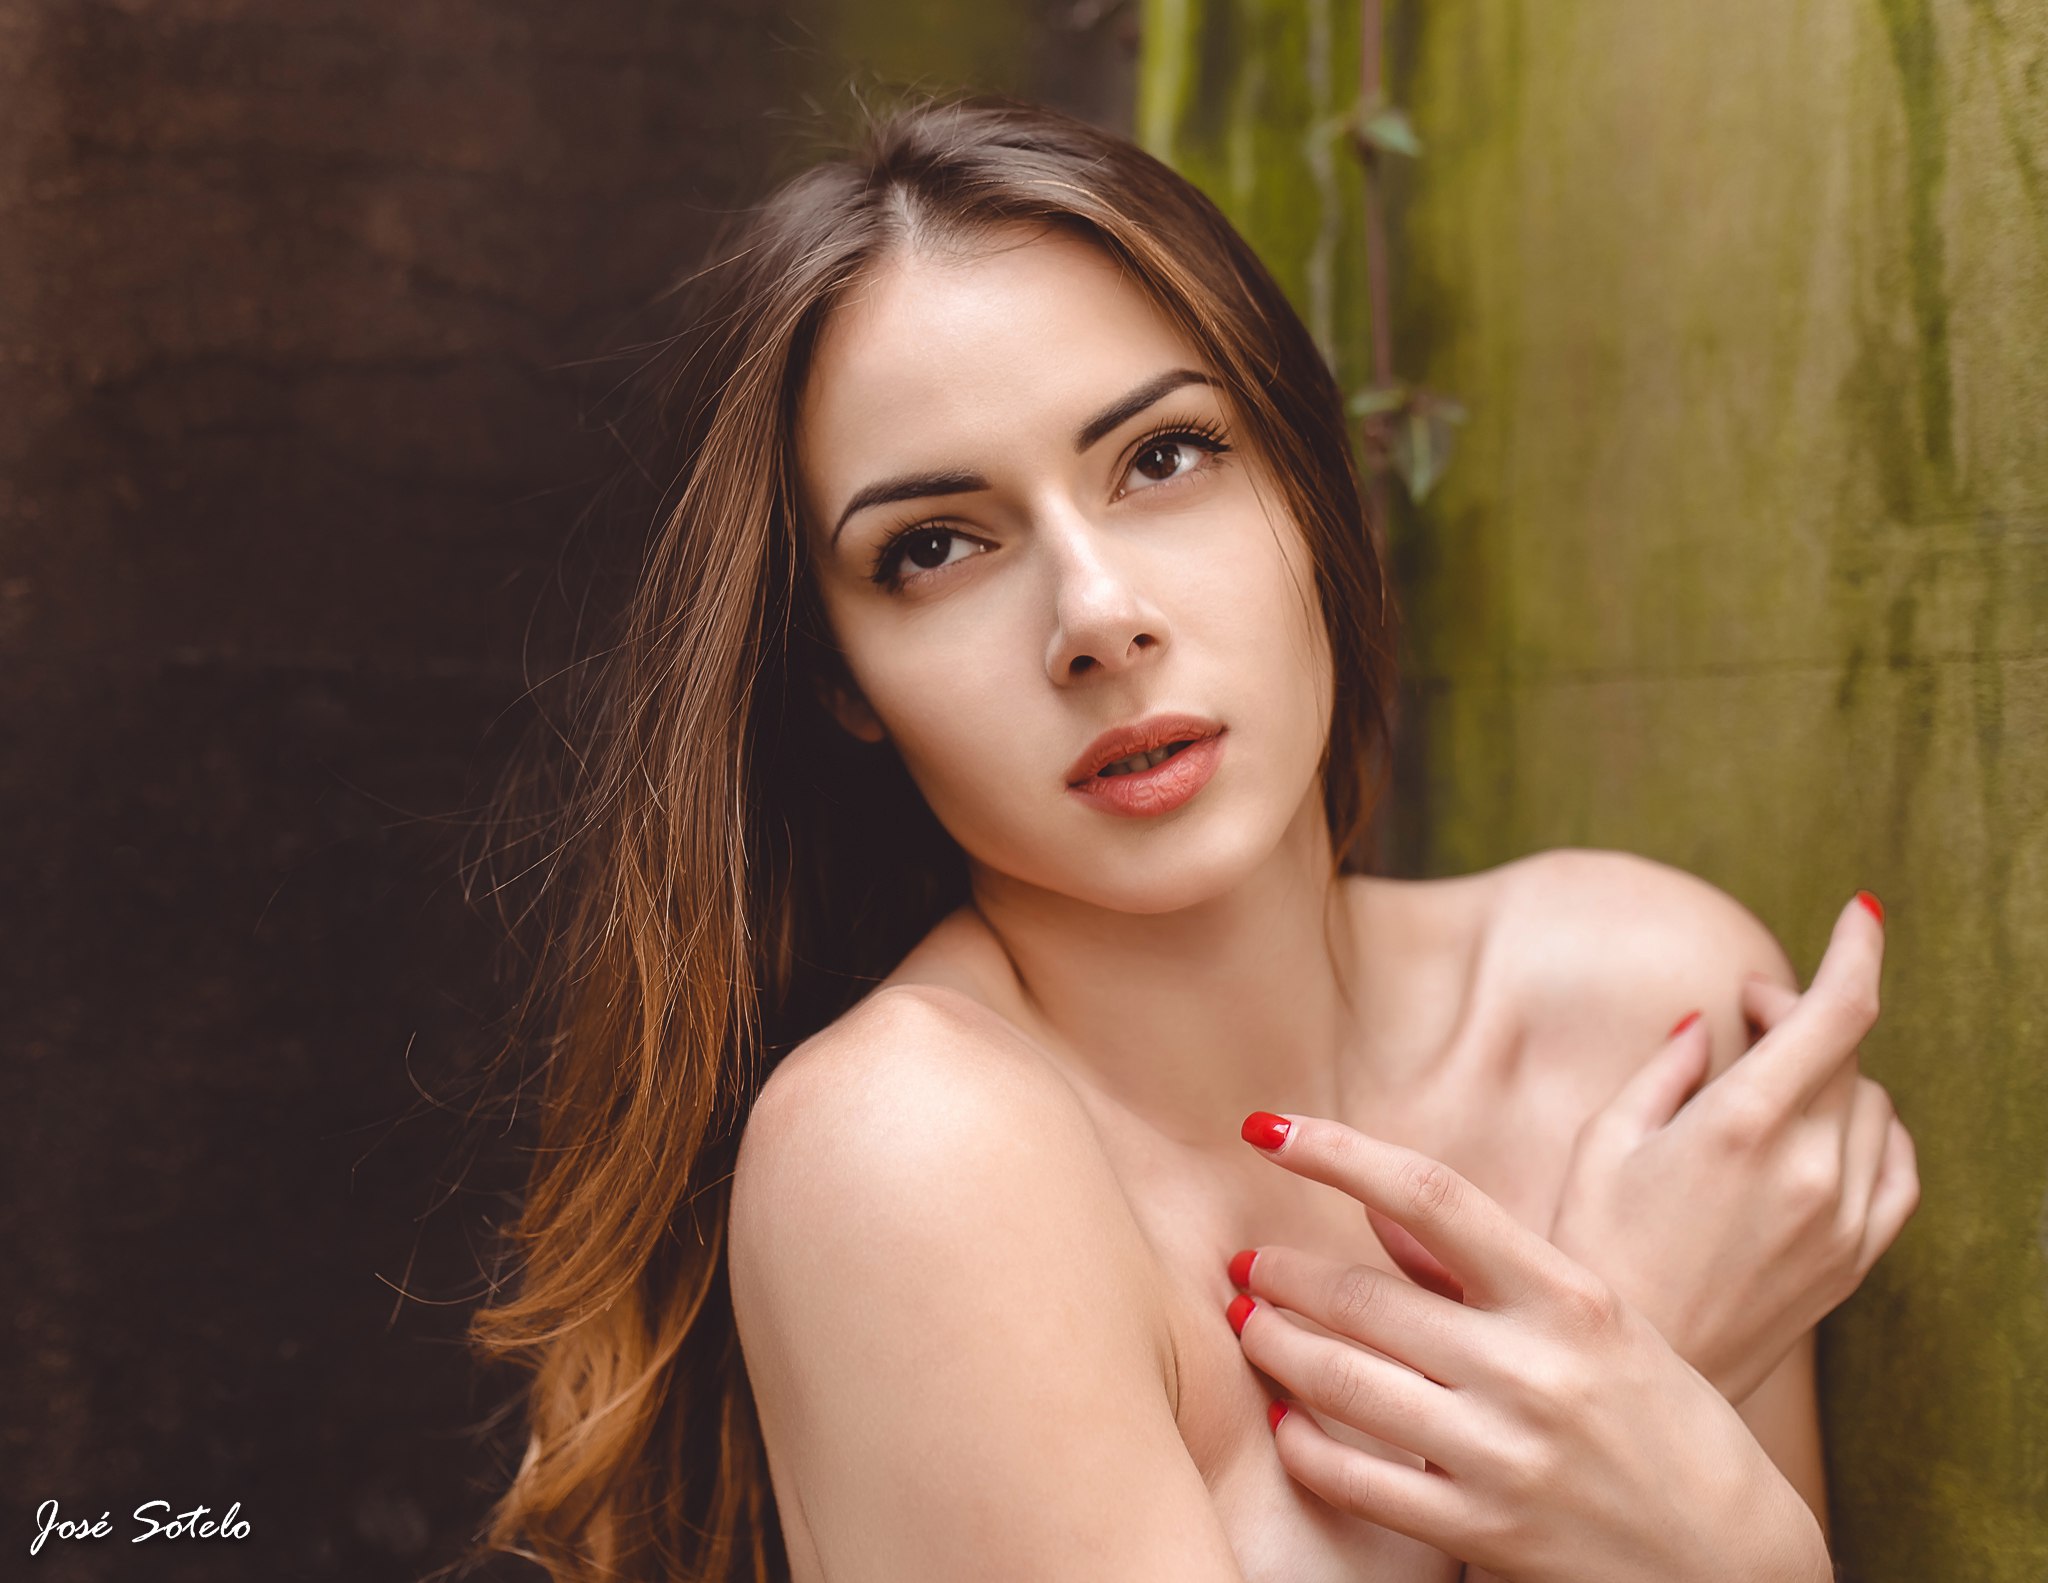 People 2048x1583 women model brunette portrait red nails women outdoors looking into the distance face Jose Sotelo implied nude closeup watermarked